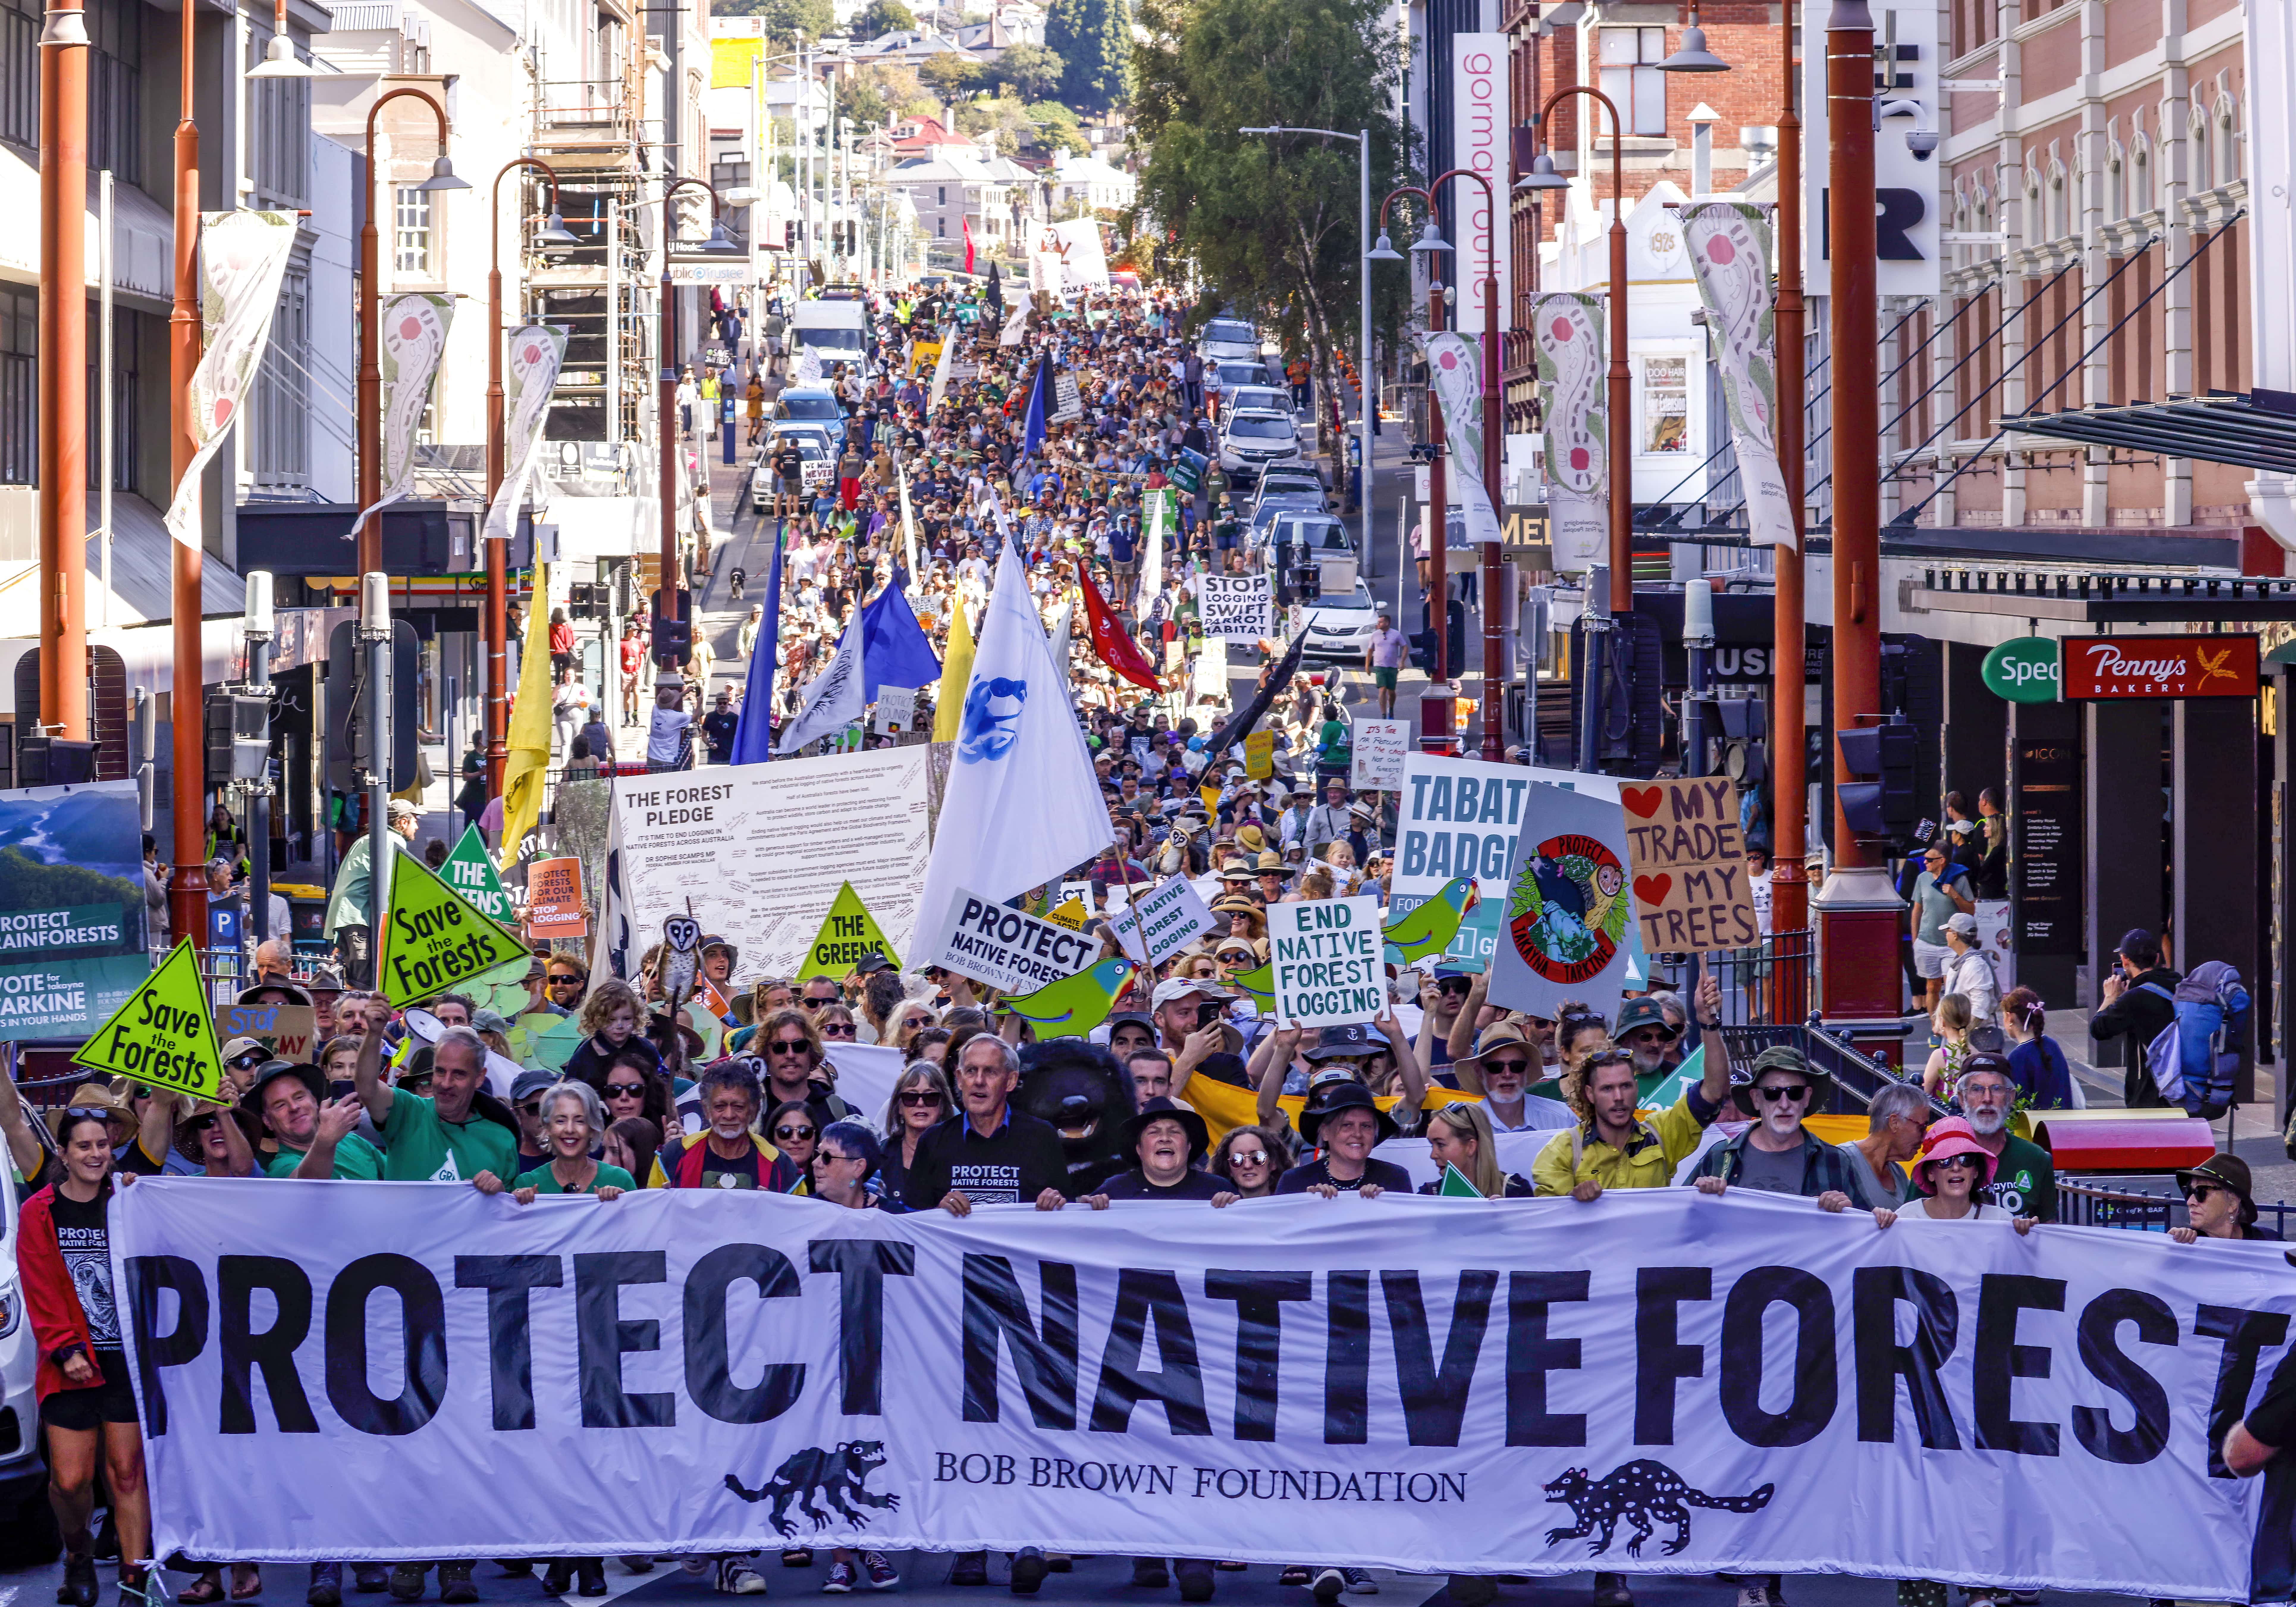 A group of protestors from the Bob Brown Foundation rally to protect native forests